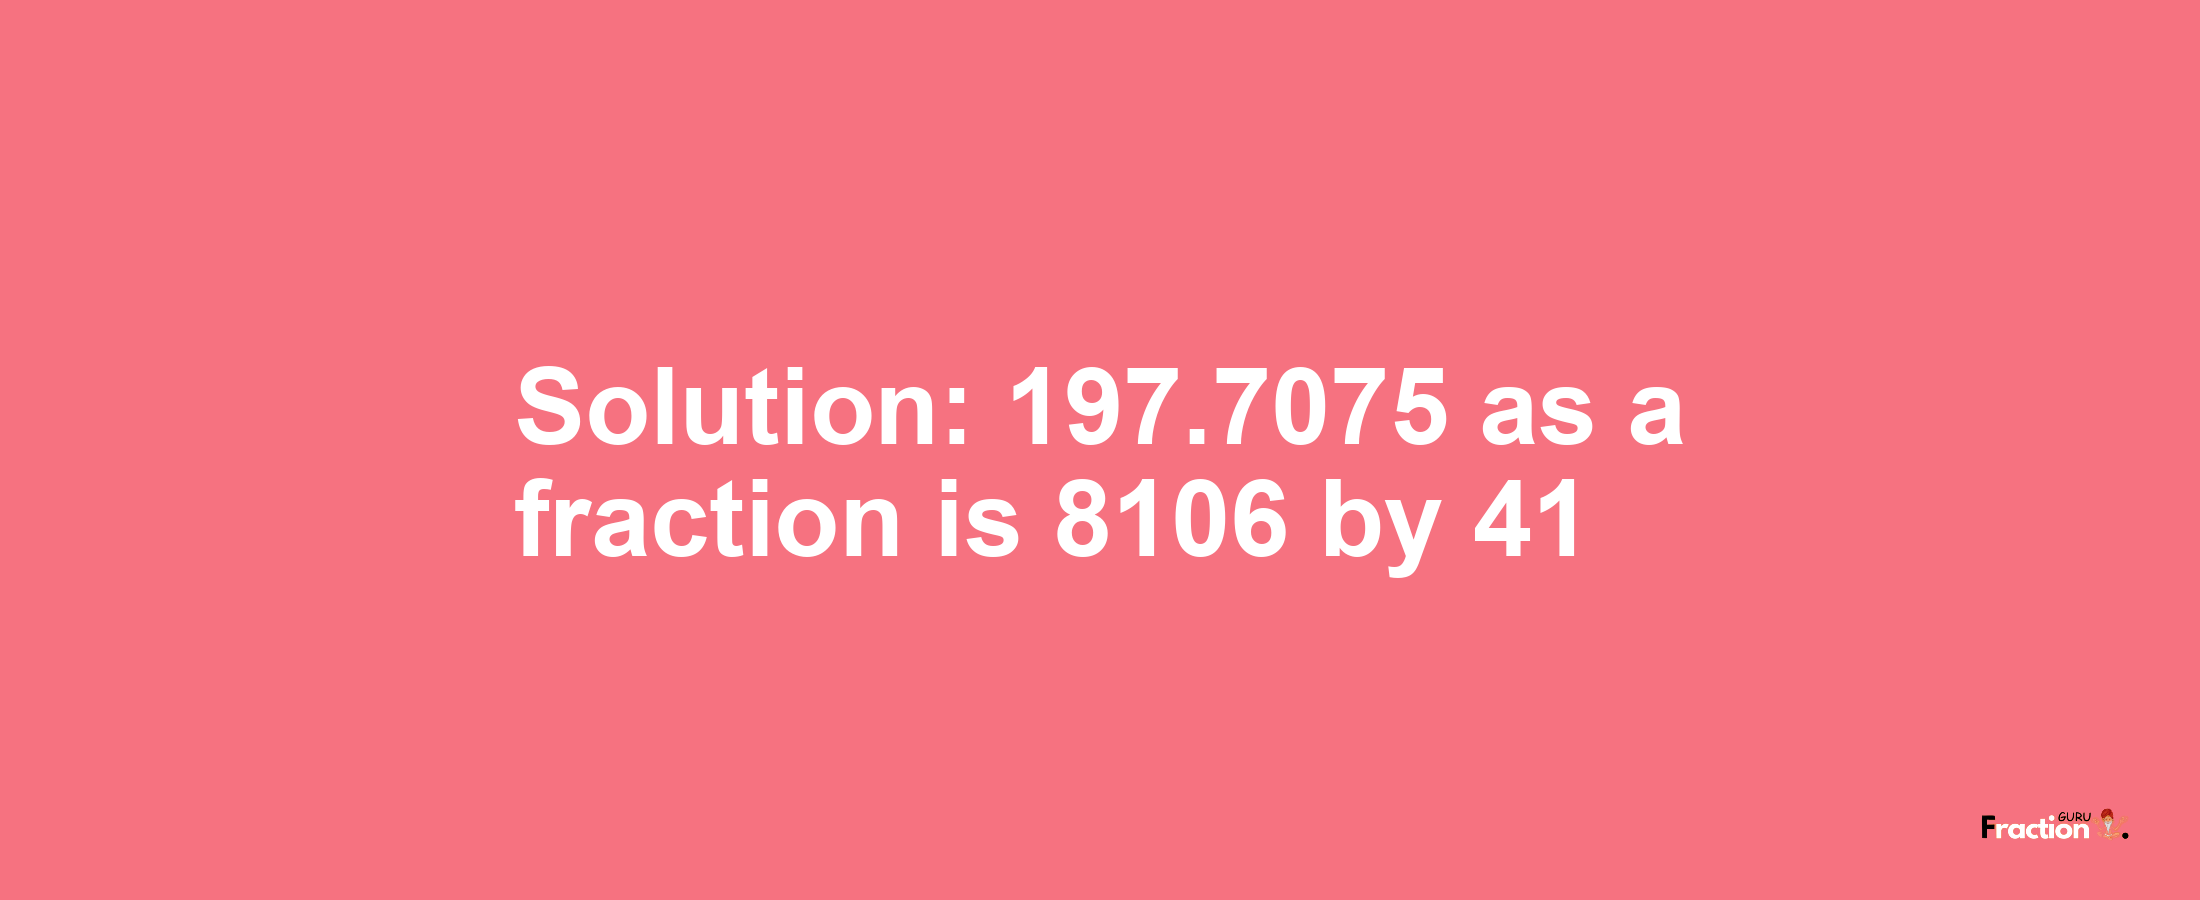 Solution:197.7075 as a fraction is 8106/41